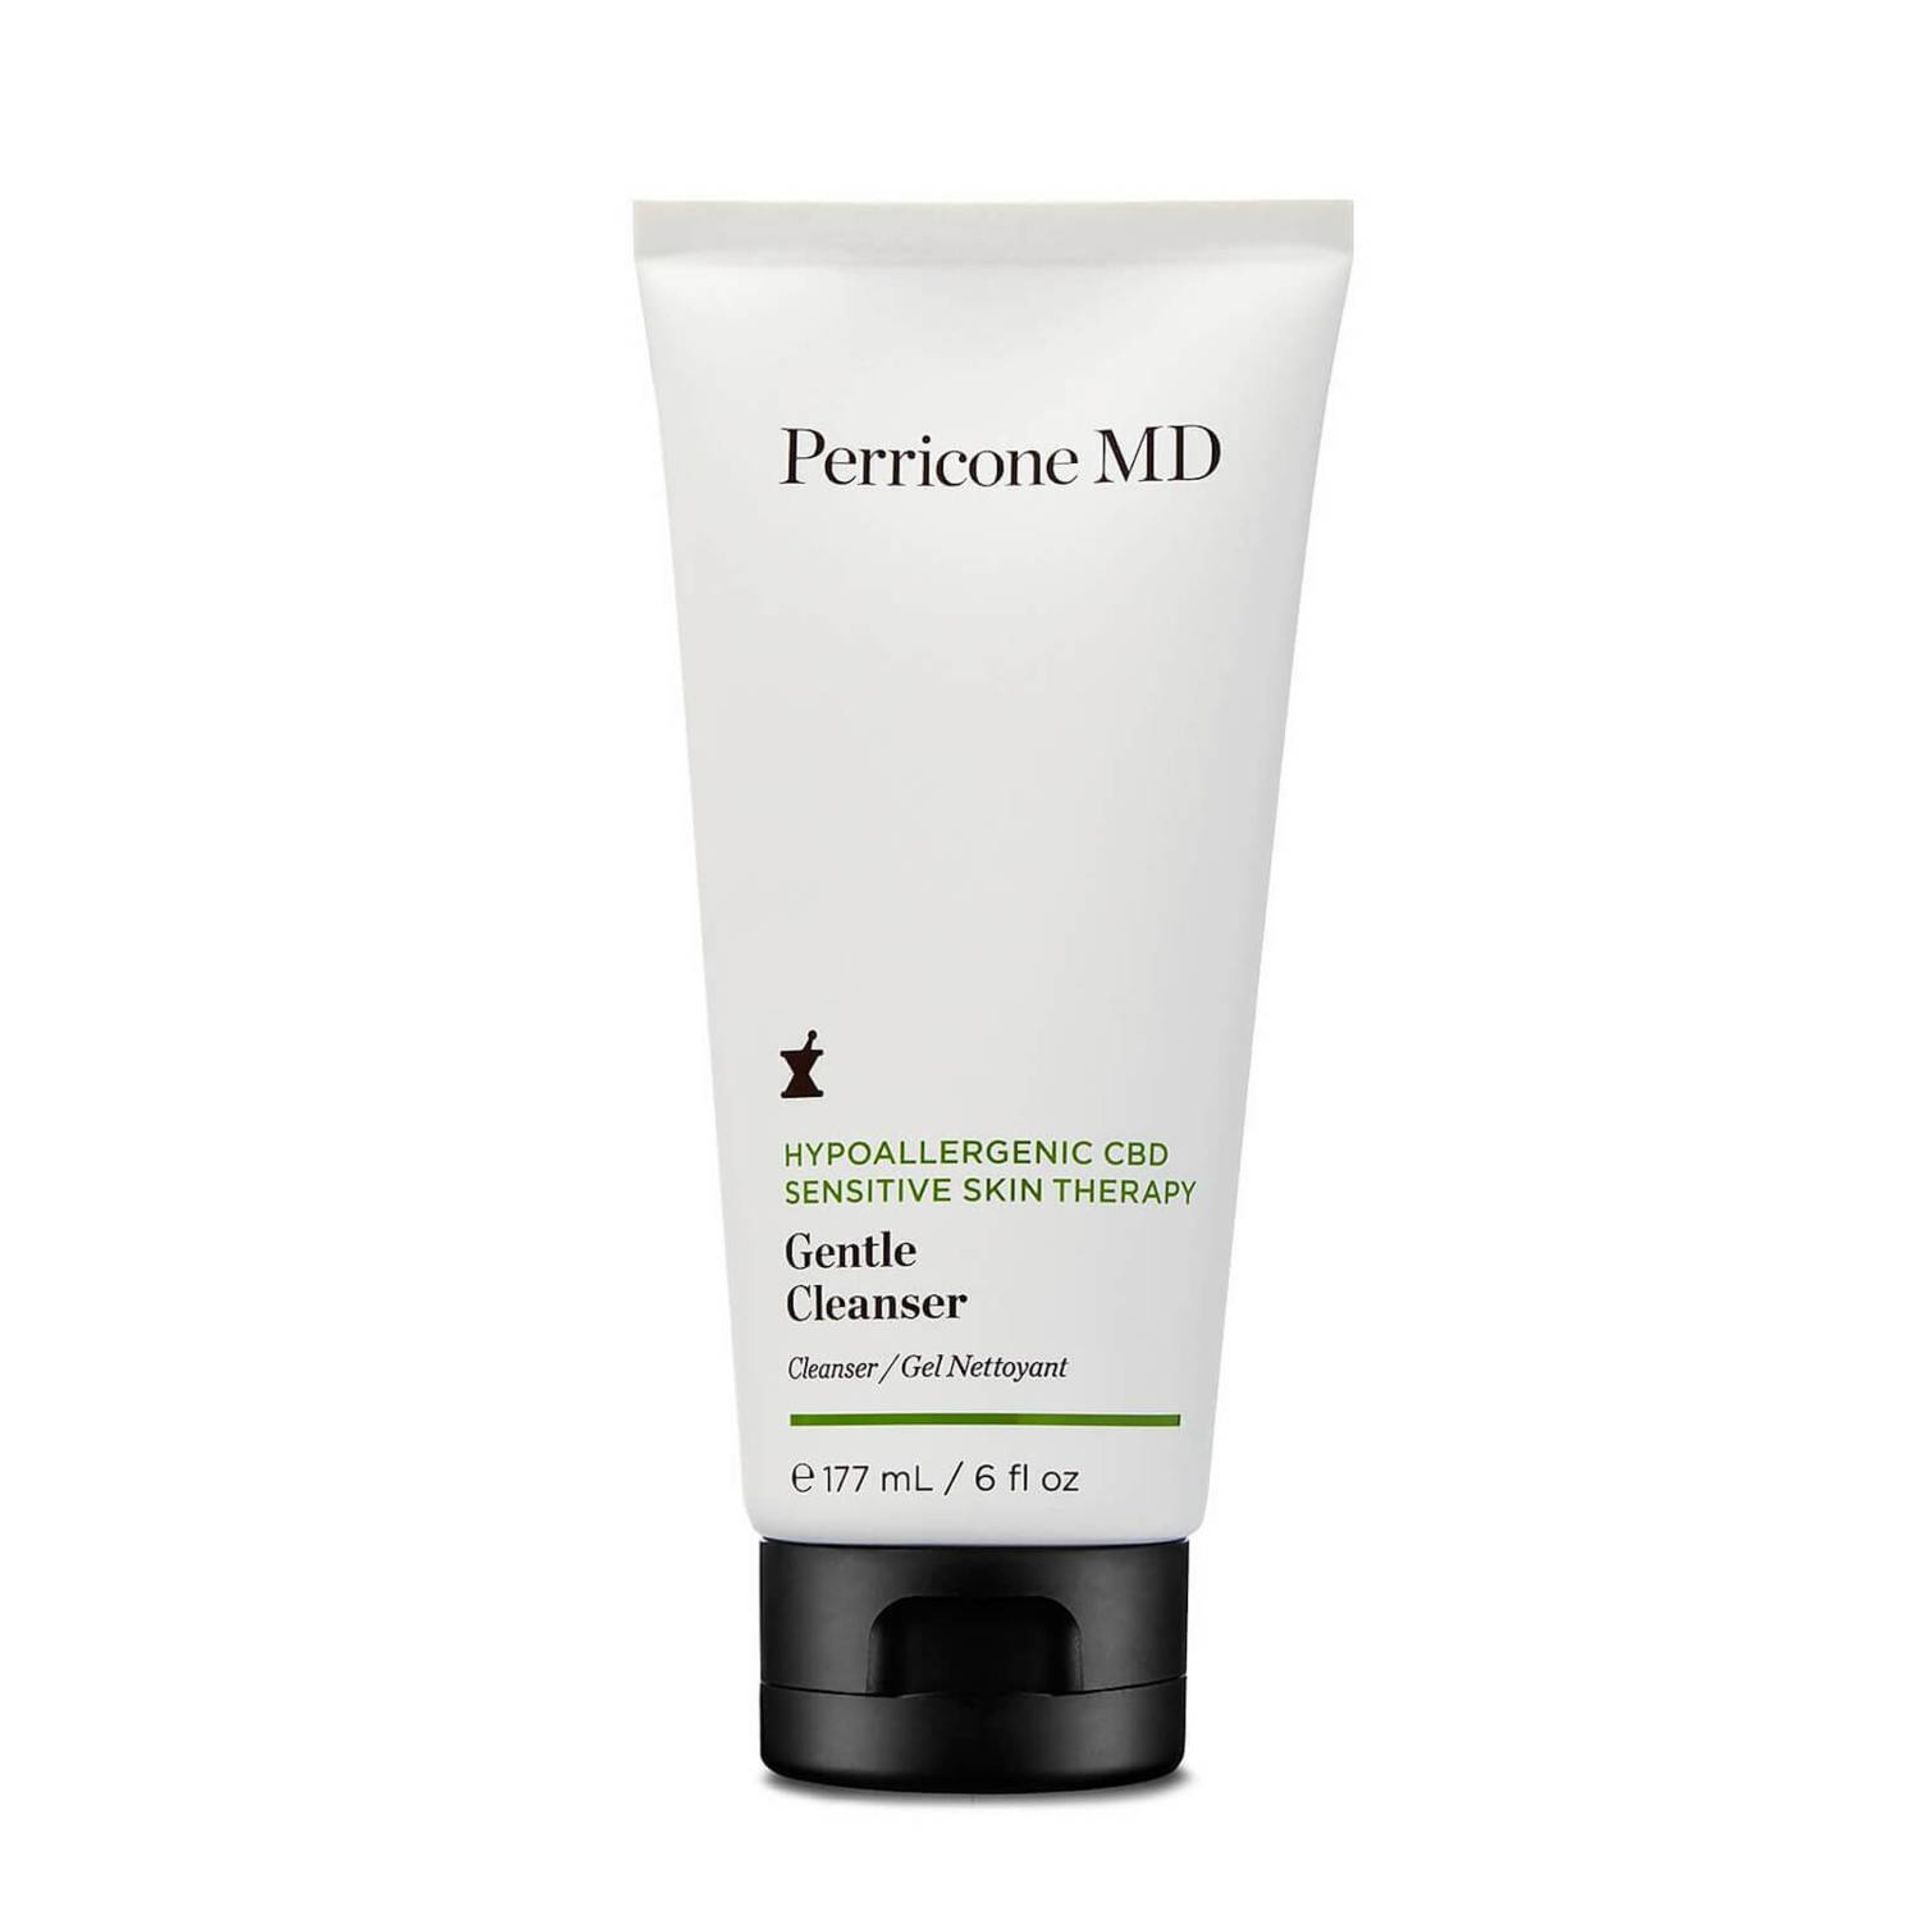 36 X PERRICONE MD HYPOALLERGENIC CBD SENSITIVE SKIN THERAPY GENTLE CLEANSER RRP £1188 - Image 2 of 3